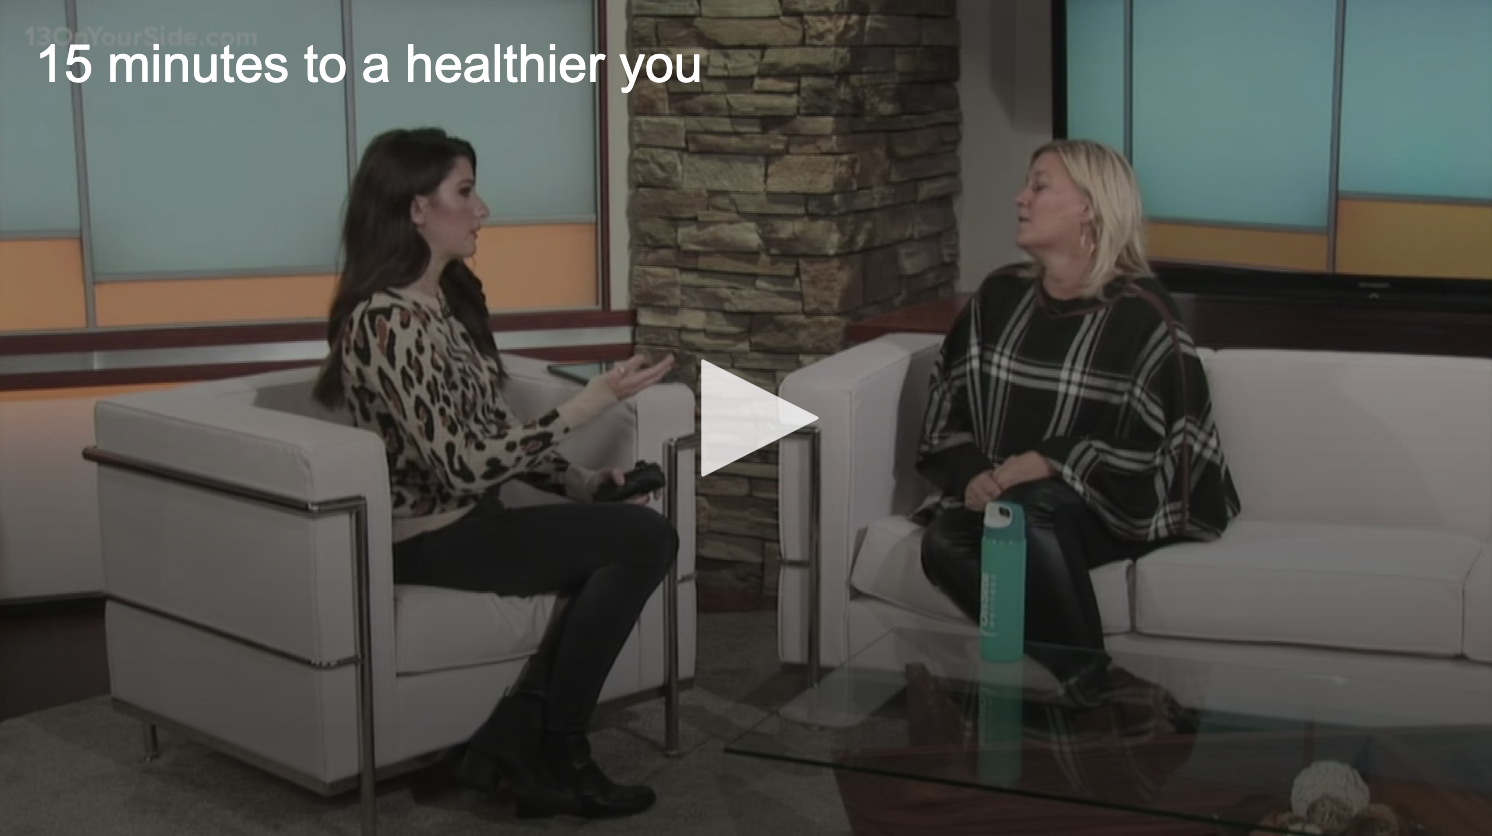 [WATCH NOW] 15 Minutes To a Healthier You